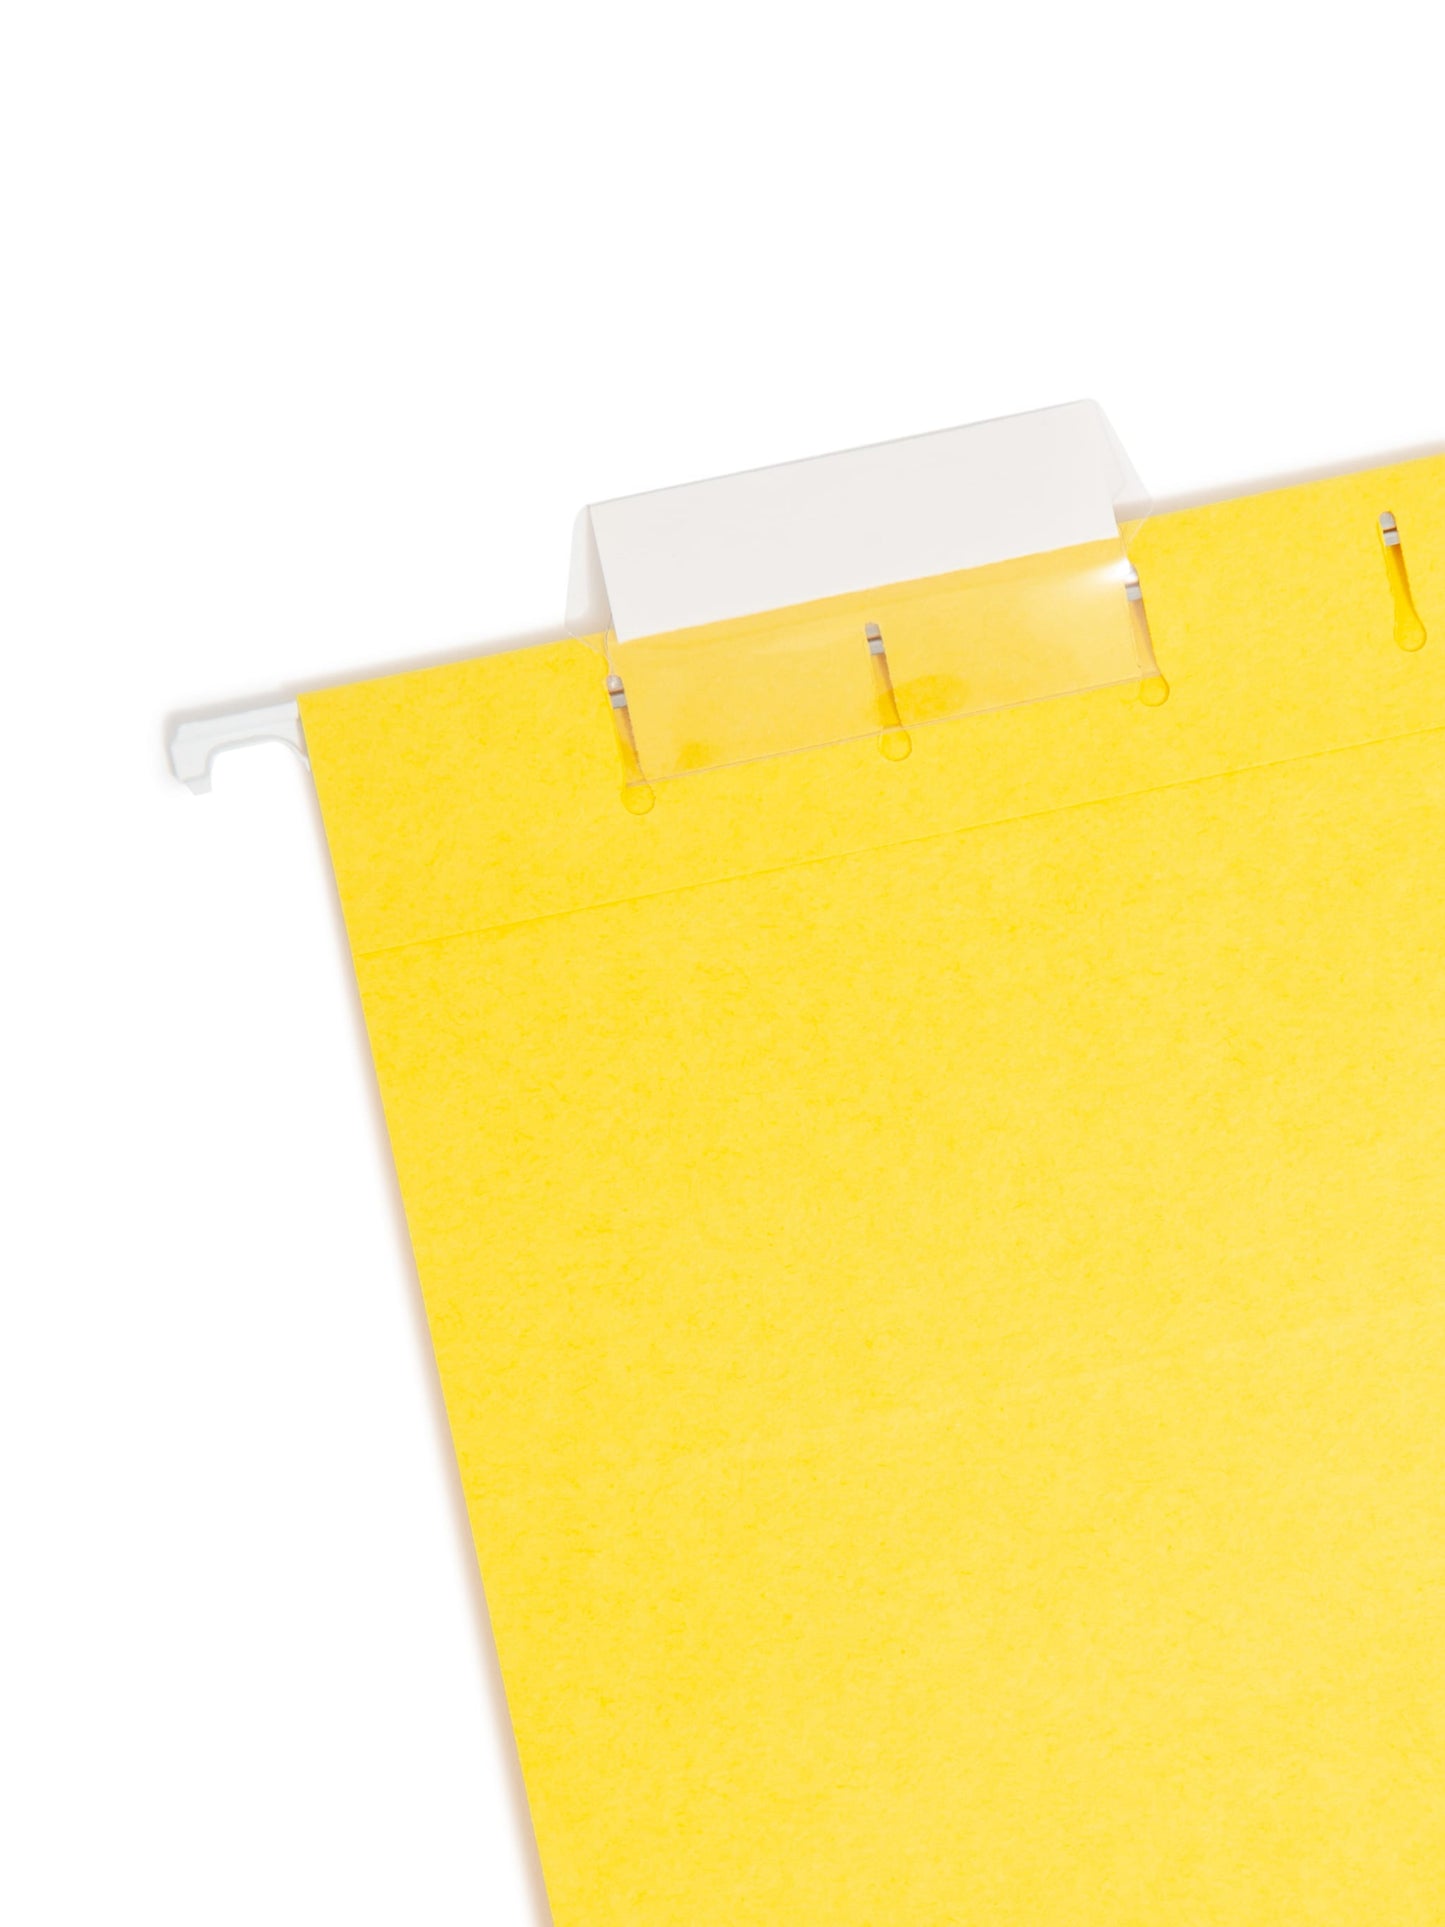 Standard Hanging File Folders with 1/5-Cut Tabs, Yellow Color, Legal Size, Set of 25, 086486641692